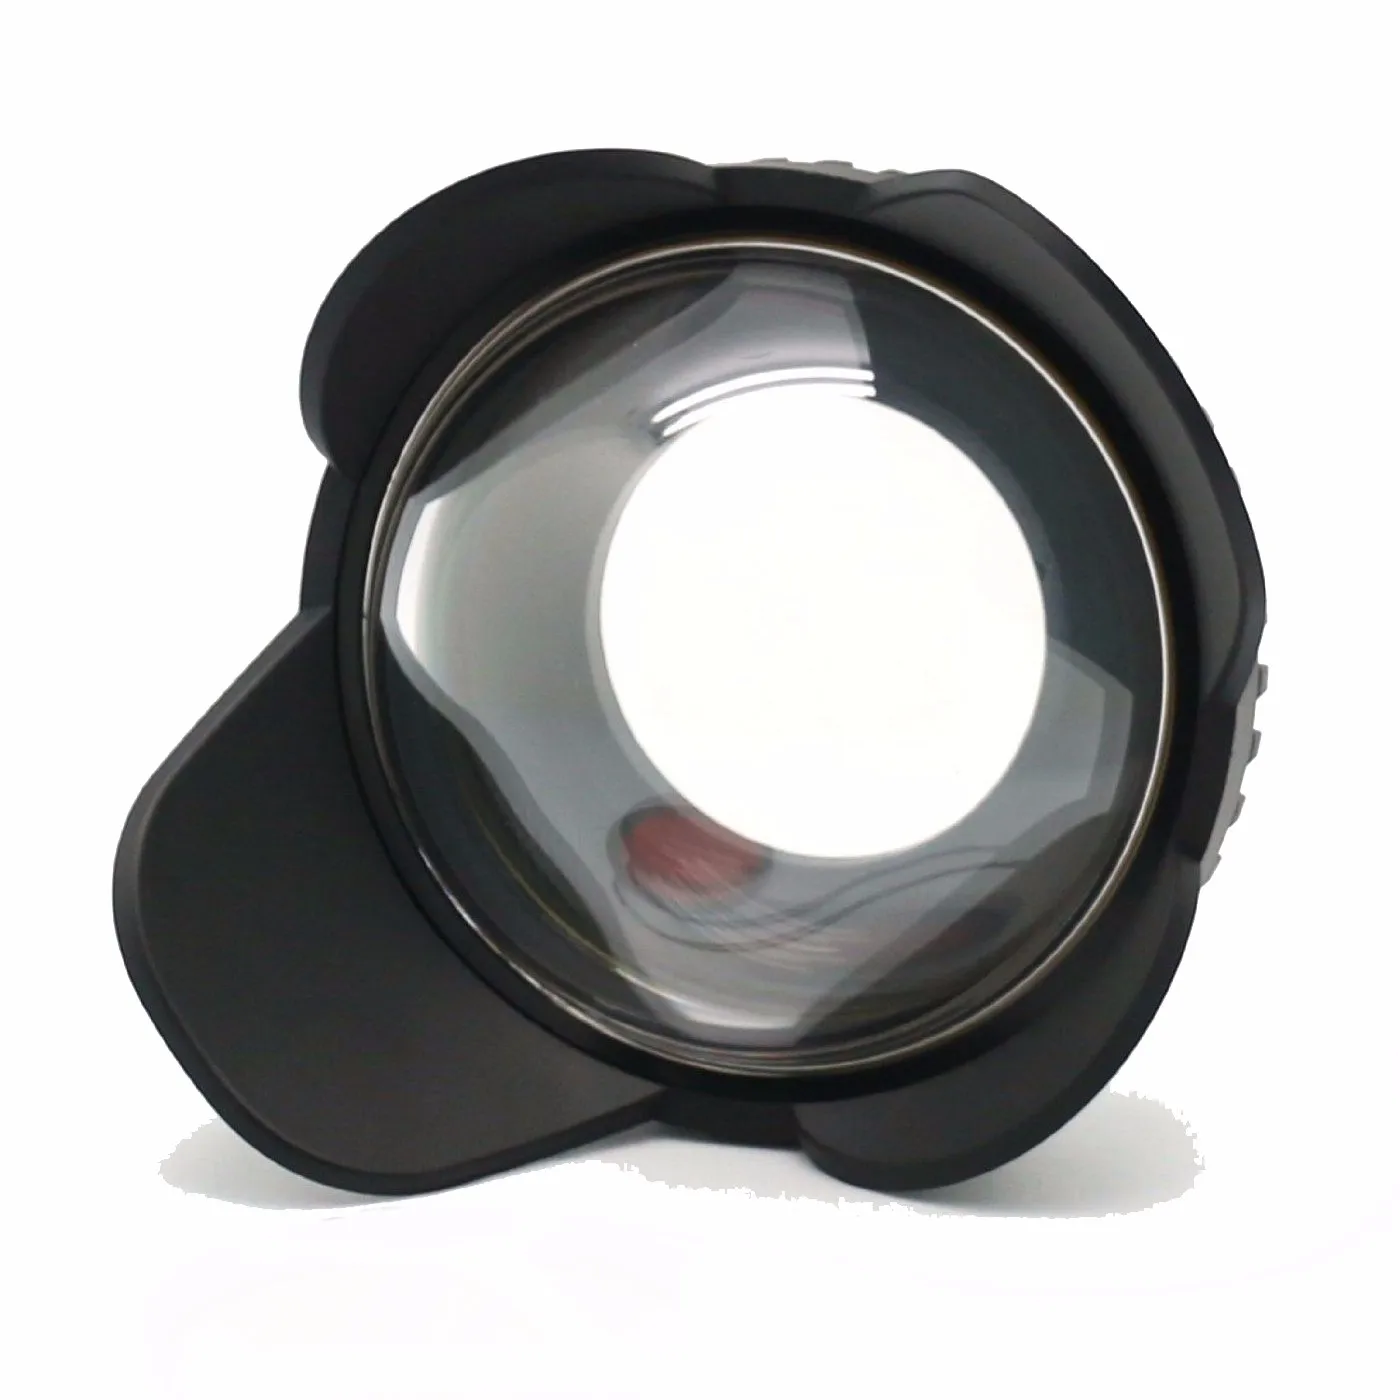 

MEIKON Underwater Camera 200mm Fisheye Wide Angle Lens Dome Port t for Camera Housing 67mm Round Adapter